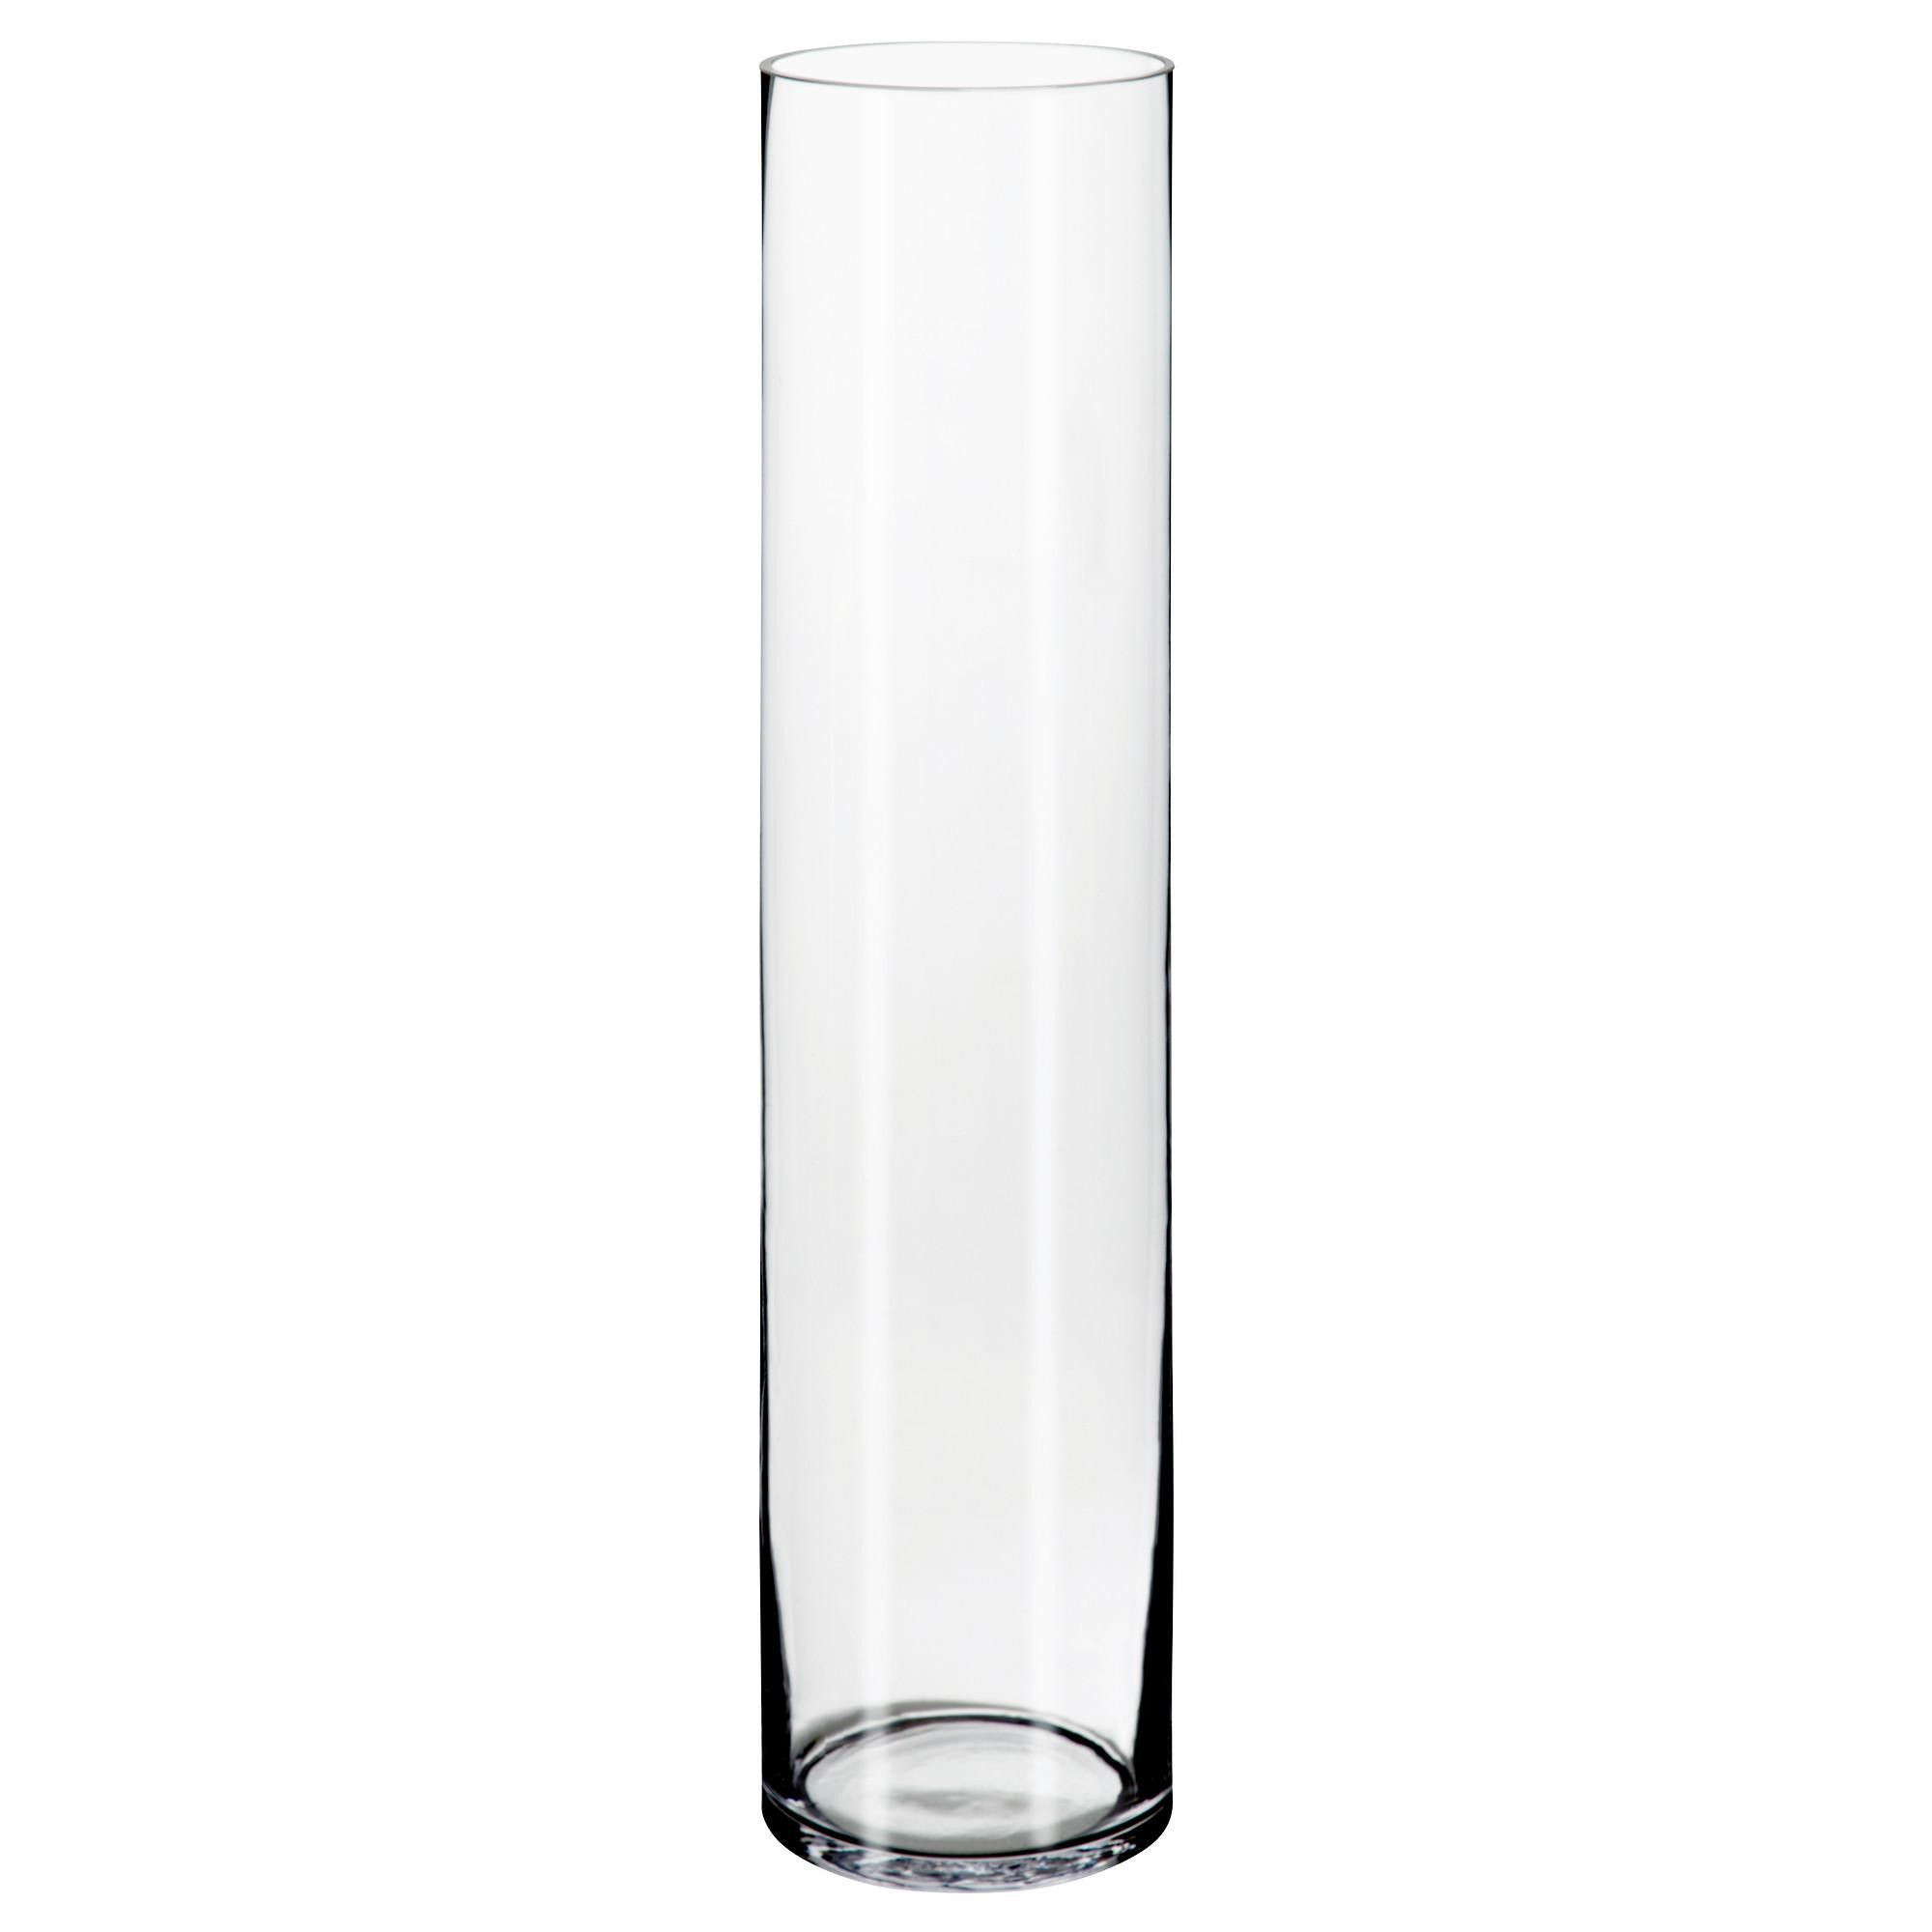 18 Fashionable Big Glass Vases Cheap 2024 free download big glass vases cheap of 37 fenton blue glass vase the weekly world with regard to coloring colored glass vases elegant living room vase glass fresh